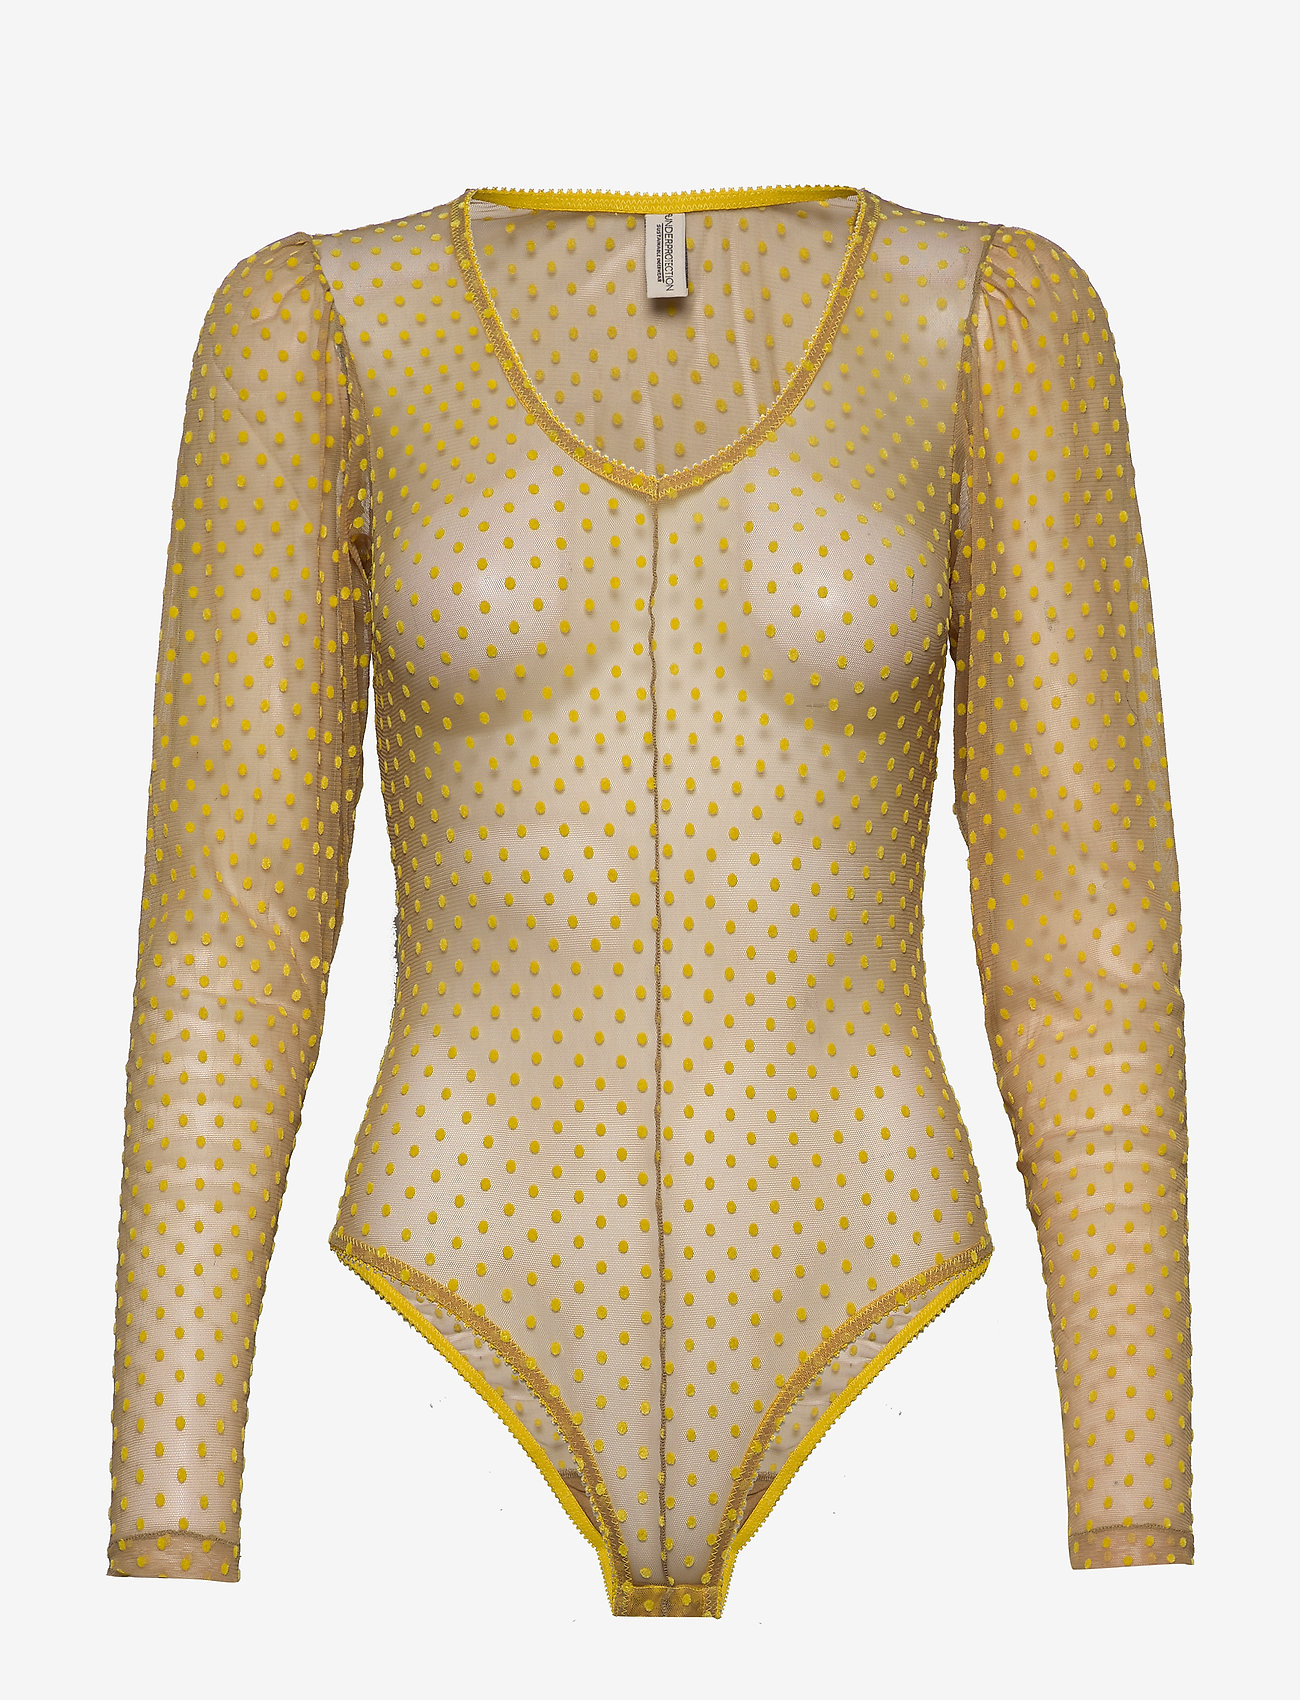 Underprotection - Donna bodystocking - naised - yellow - 0